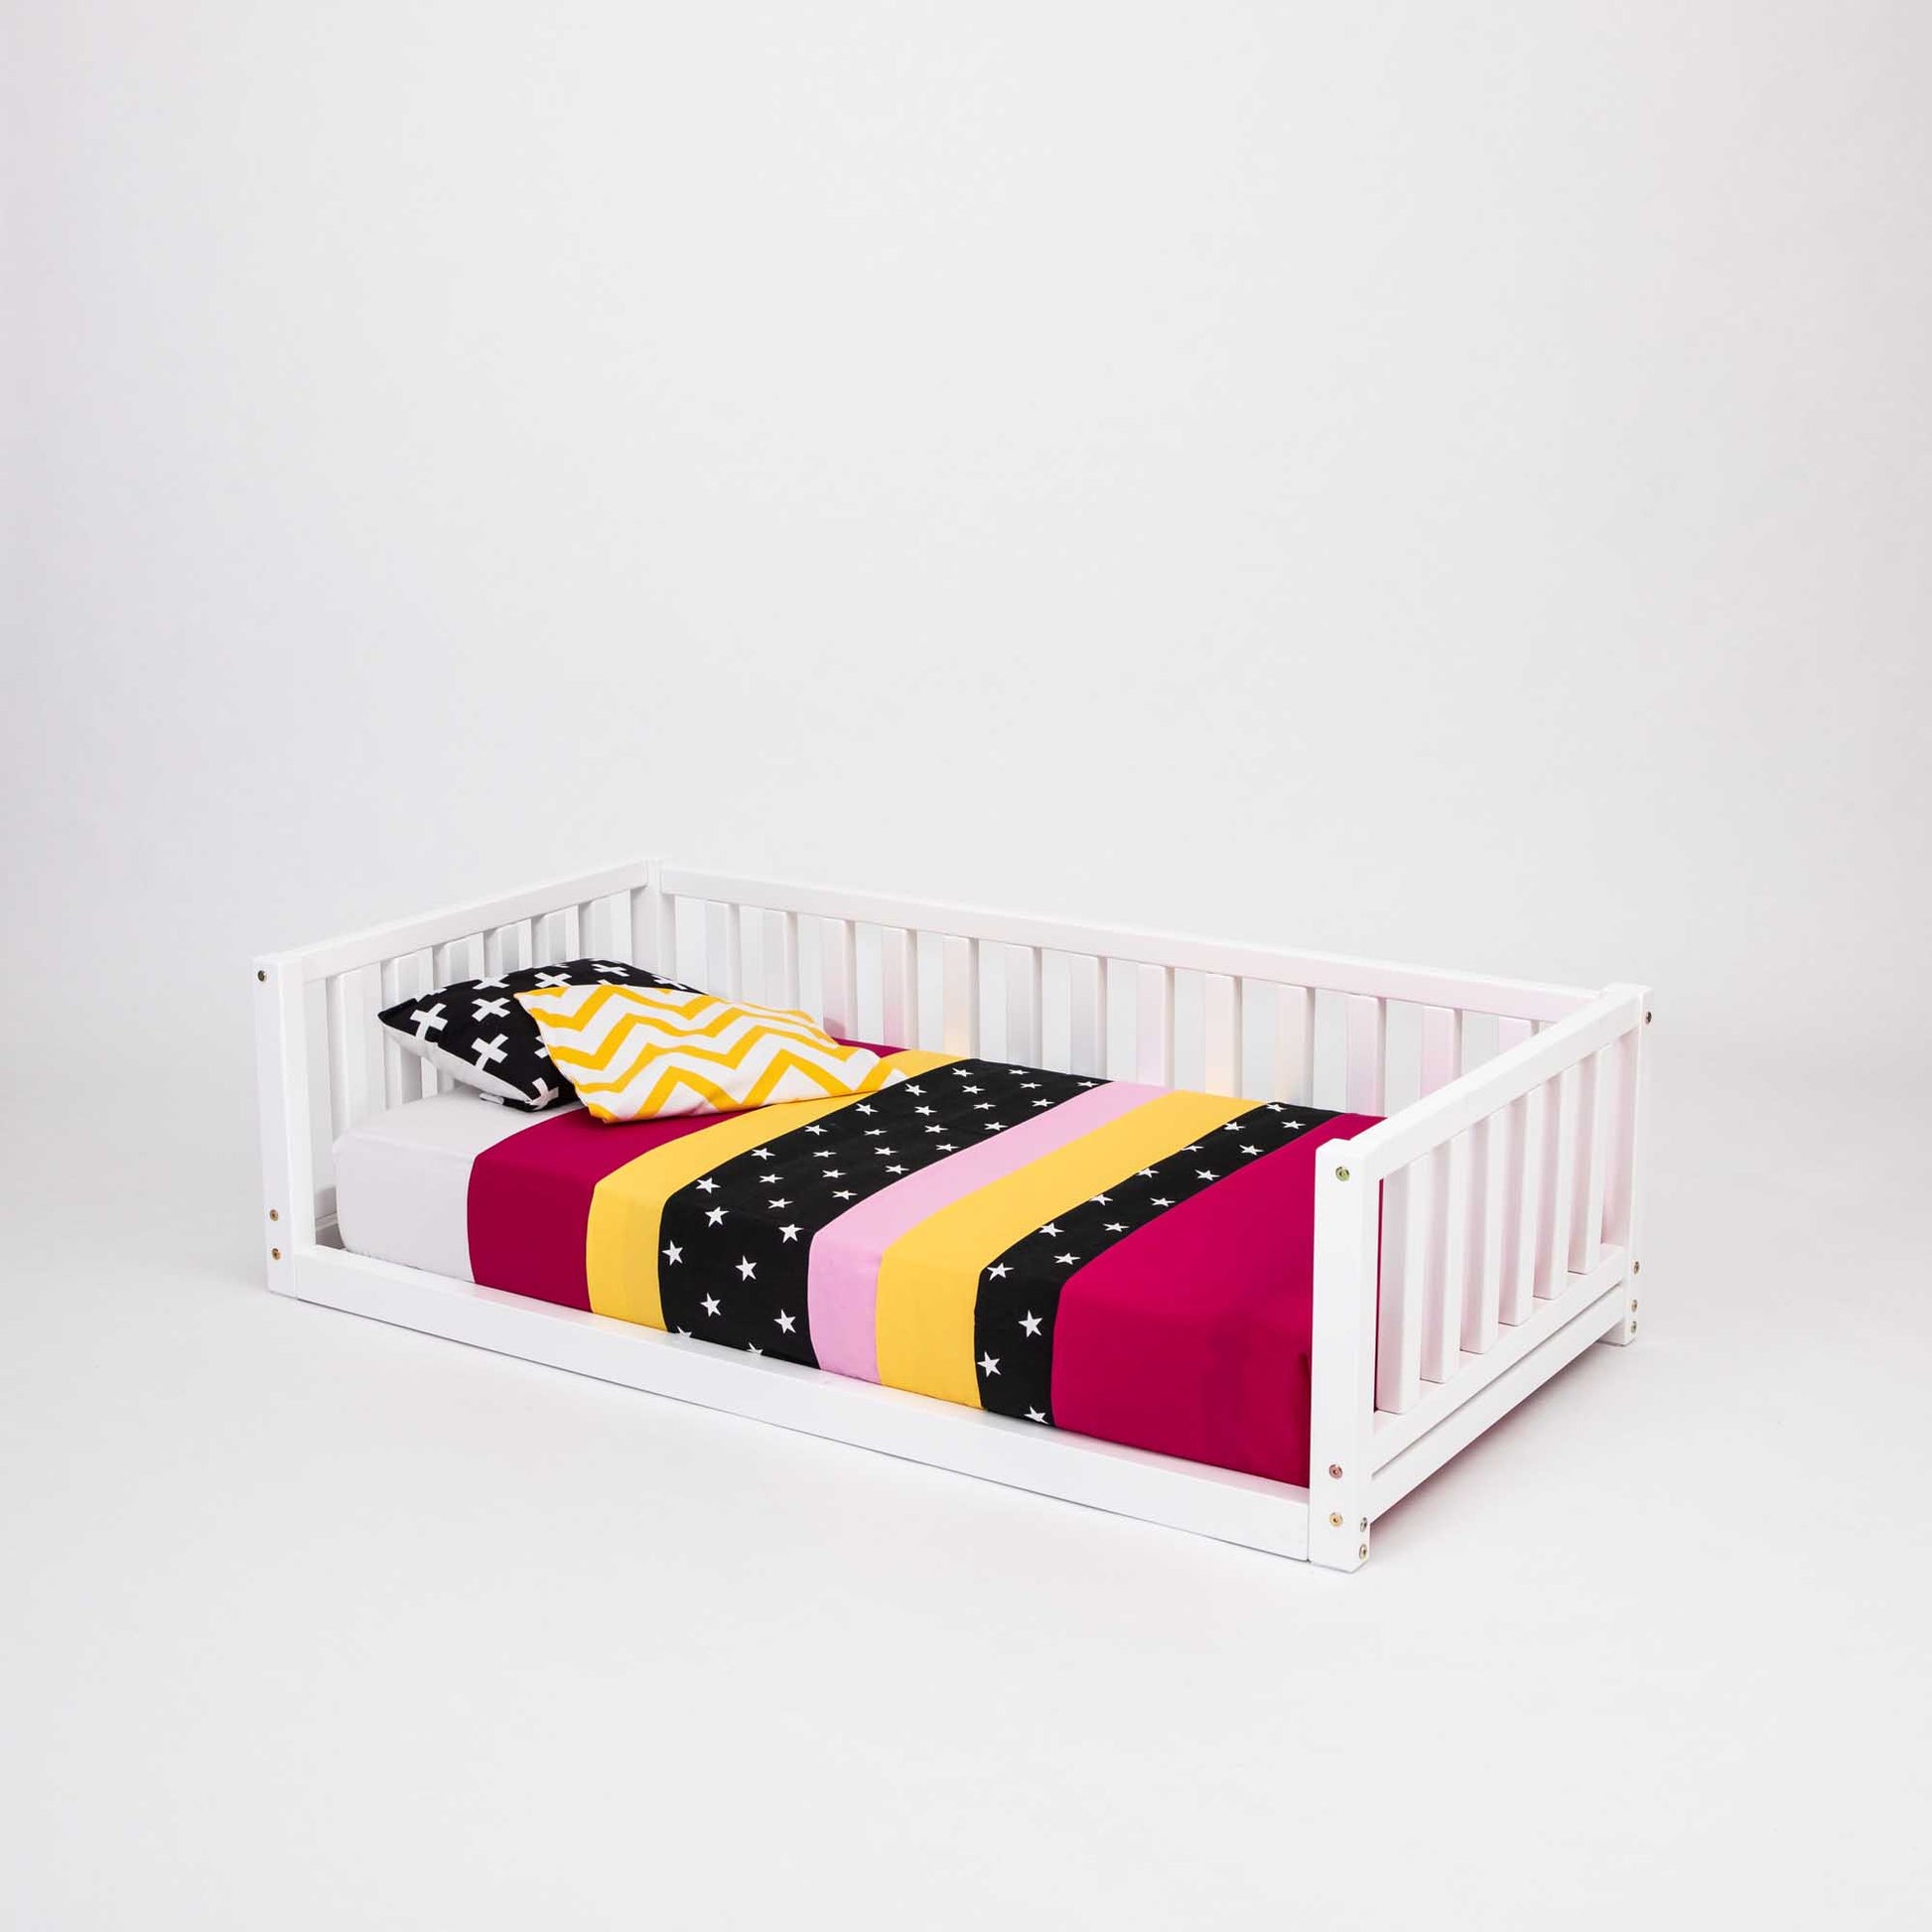 A Sweet Home From Wood 2-in-1 toddler bed on legs with a 3-sided vertical rail with a colorful striped blanket.